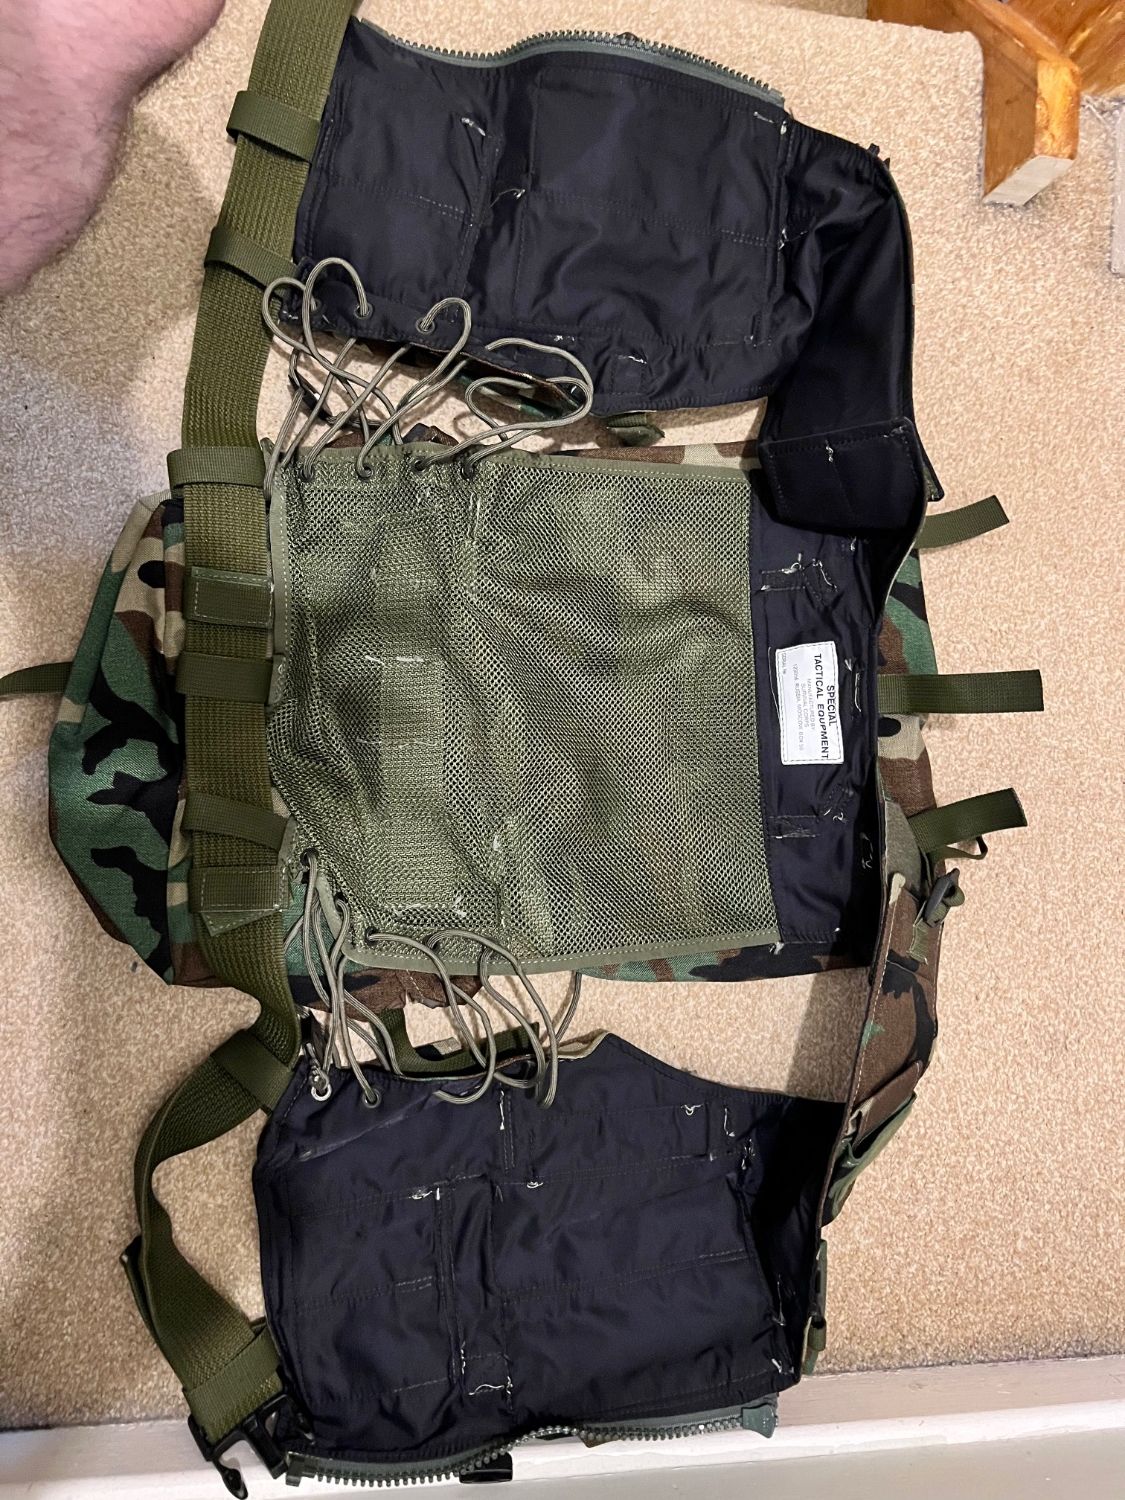 Russian SRVV vest - Gear - Airsoft Forums UK